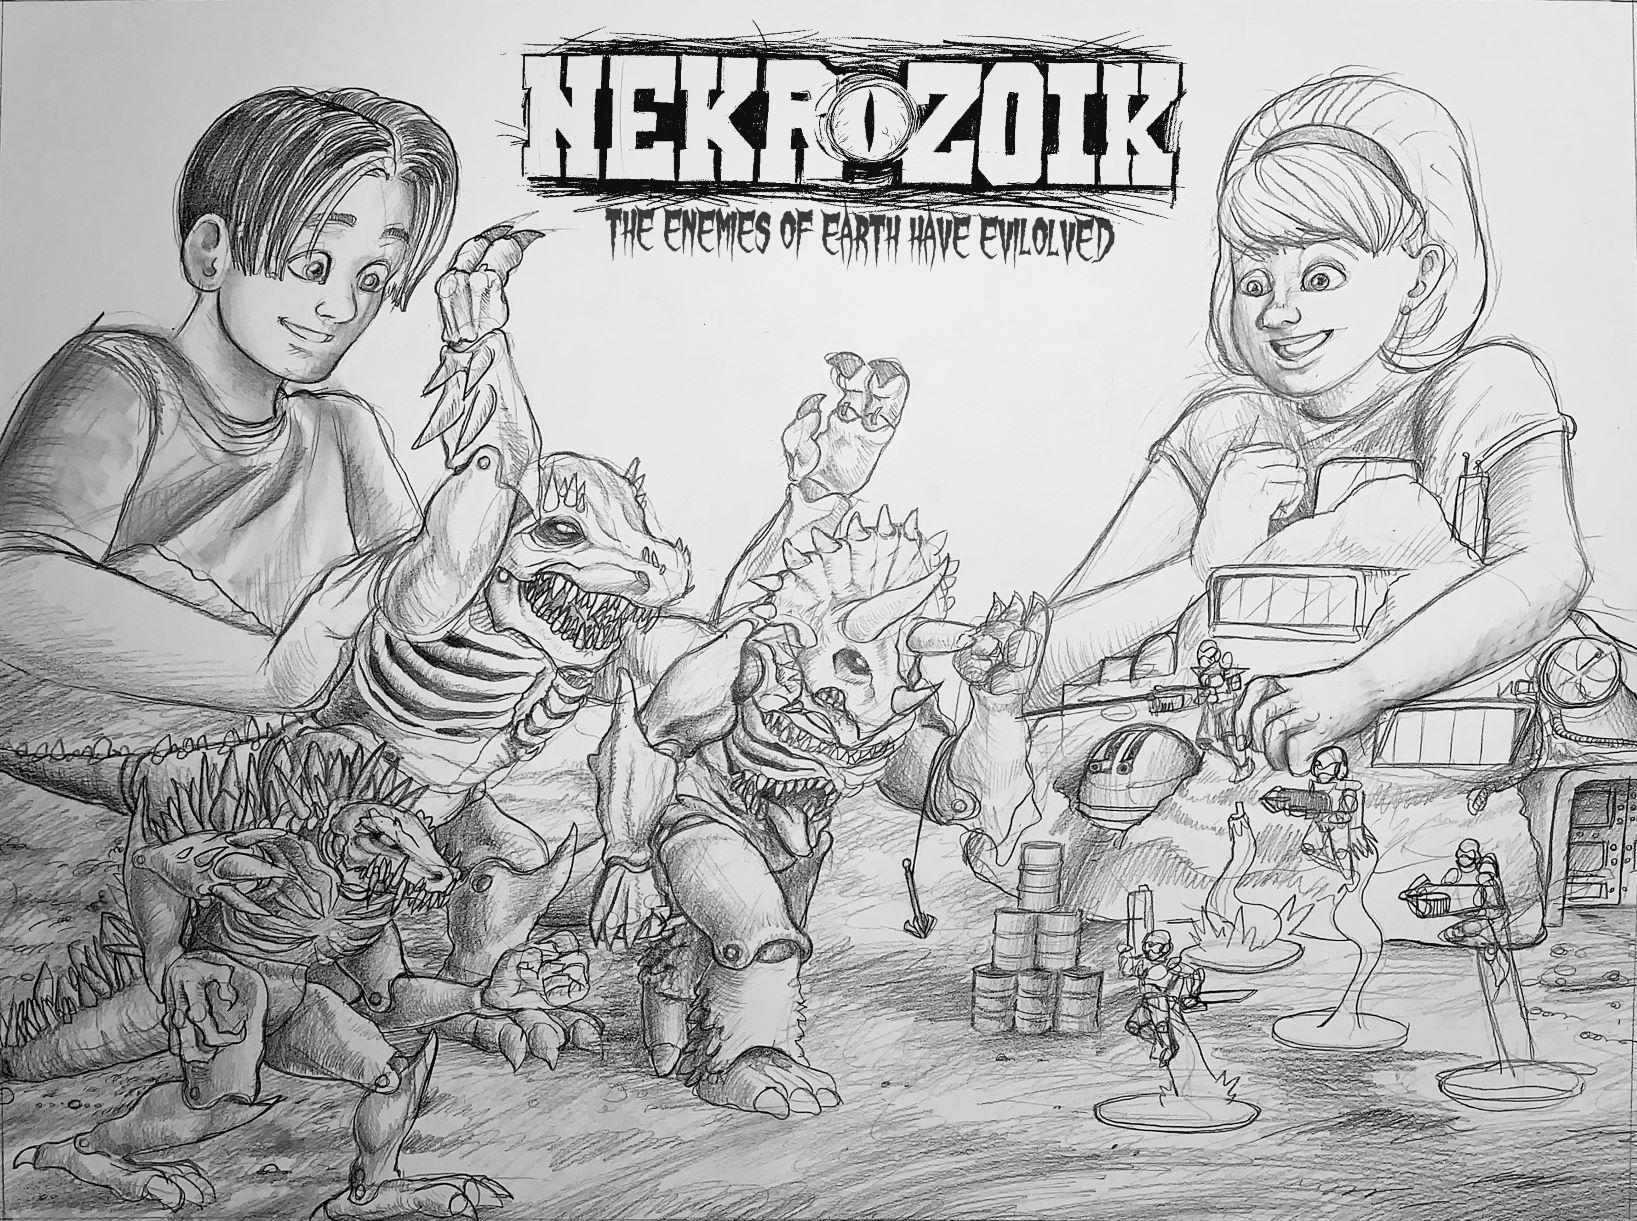 This is a catalog advertisement for the NEKROZOIK toy line.  A boy on the left is manipulating the Nekrozoik Dinosaurs.  A girl con the right controls Terra Command, the human fighters.  The giant dinosaurs loom menacingly over the human fighters, while the humans in their battle armor are set on plastic bases that look like rocket blasts to simulate flight.  Beneath the girl can be seen the Terra Command Base.  The human fighters shoot threads with plastic "hooks" as if to try to trap the dinosaurs.  The dinosaurs look mutated and humanoid, standing erect, much larger than the human action figures.  The dinosaurs have gripping claws, spikes and zombie-like rib-cages.  The image looks to be trying to convey the image of the children engaged in play.  The white boy and girl look excitedly down at their play area, as if they're standing behind a table that has been modified to resemble a battlefield.